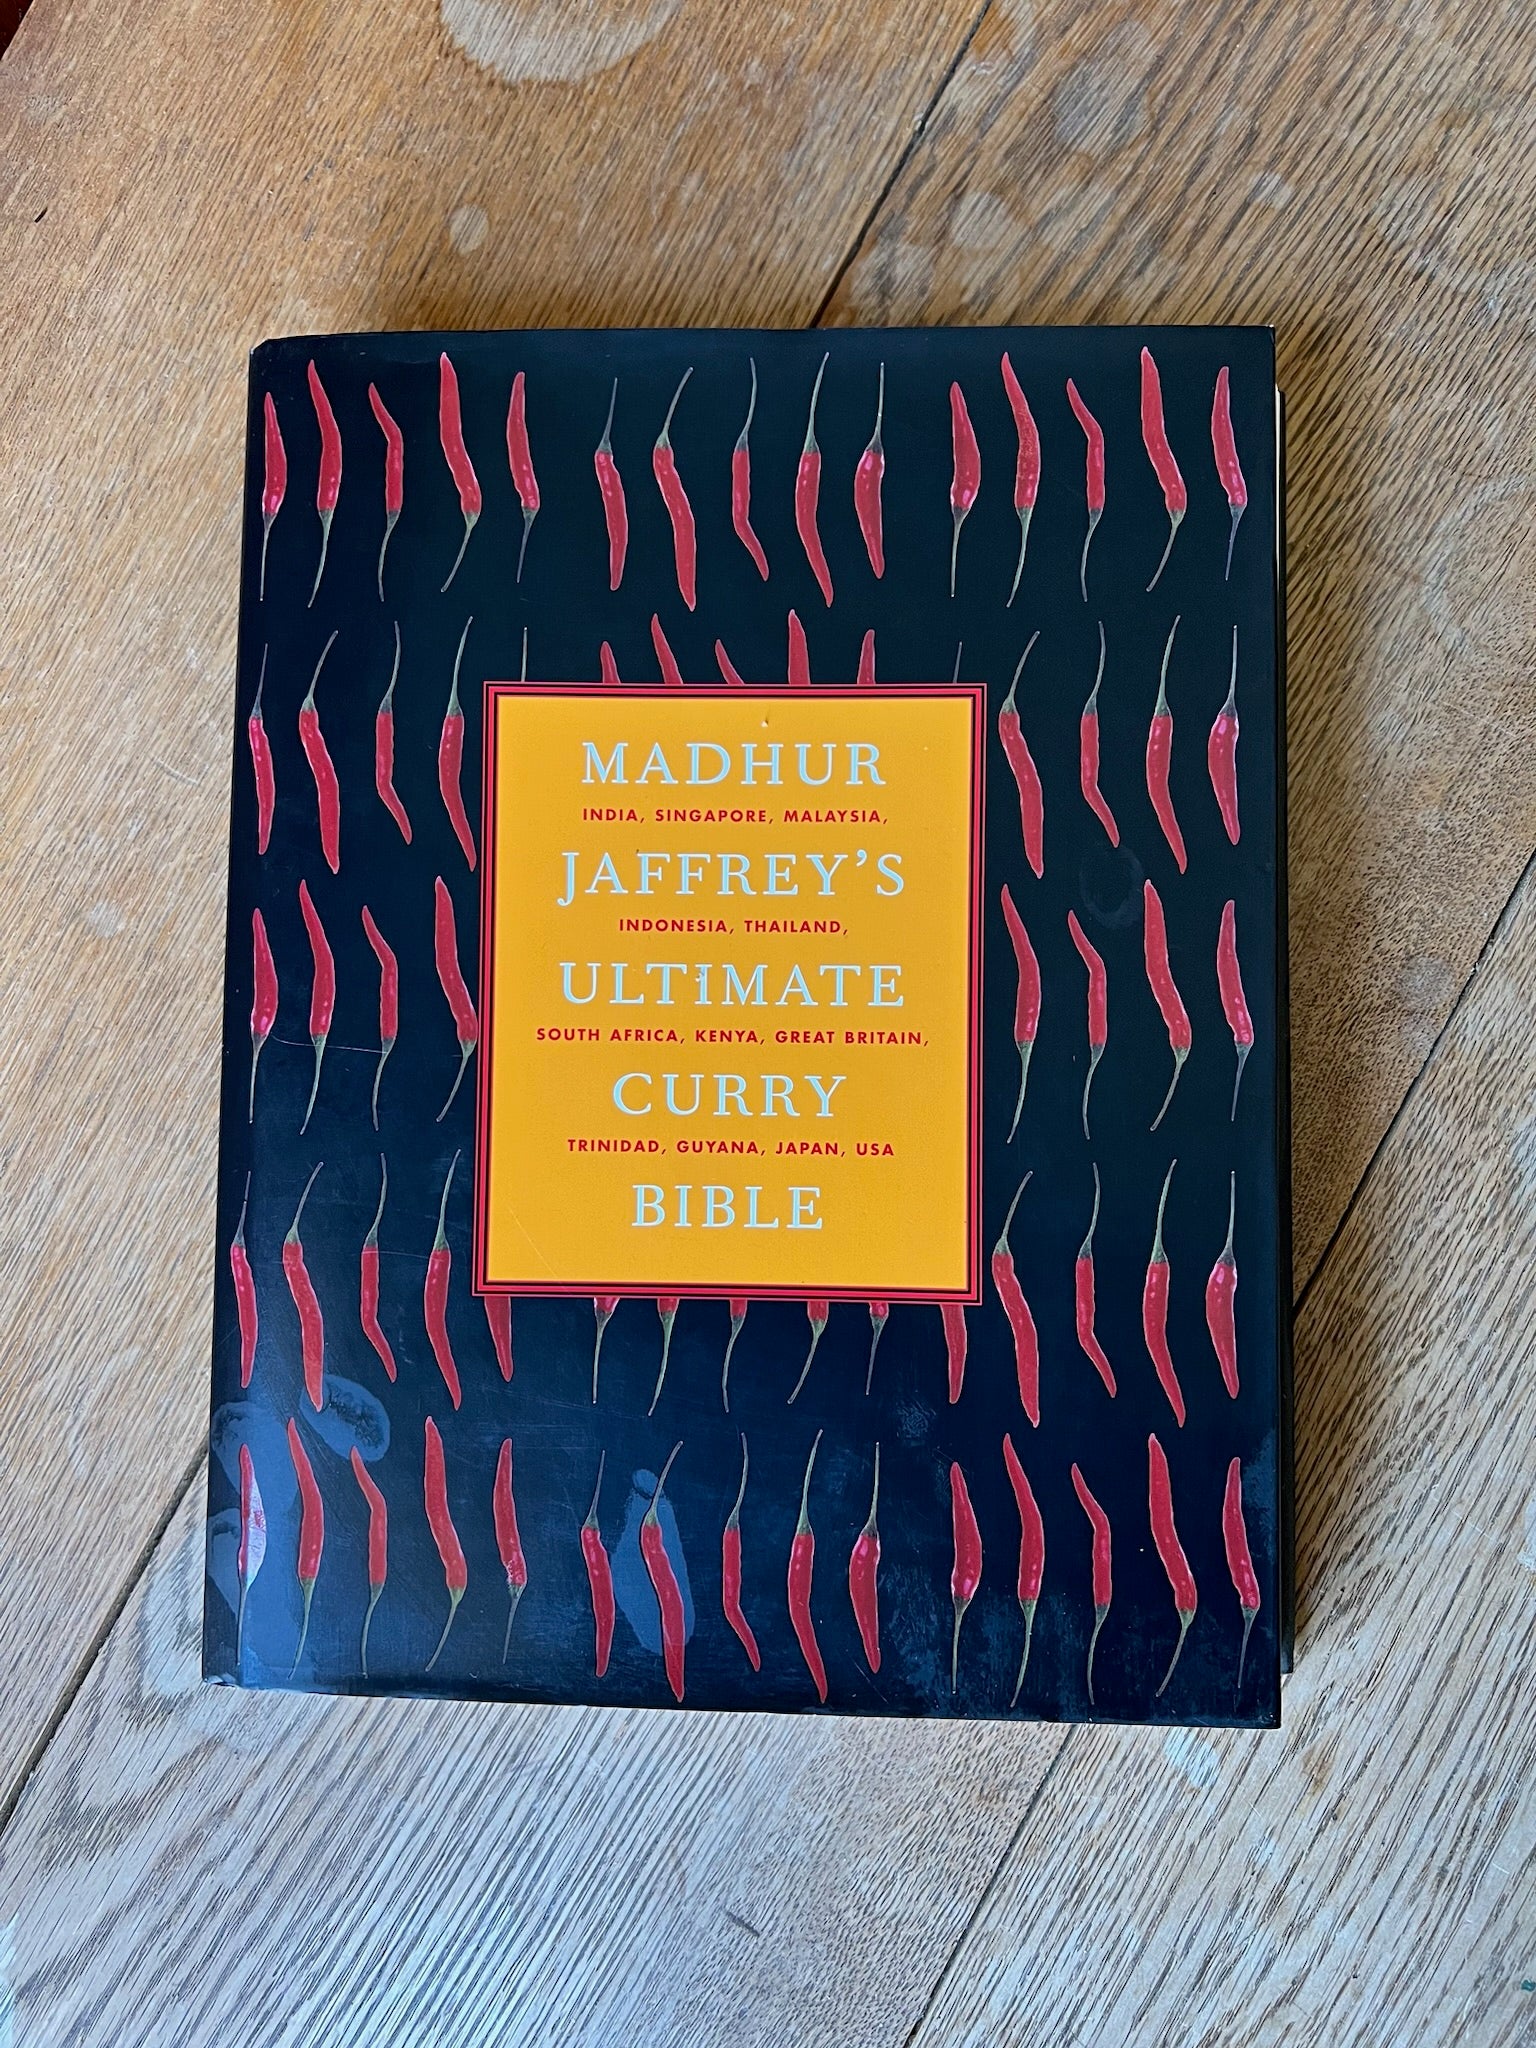 ‘MADHUR JAFFREY’S ULTIMATE CURRY BIBLE’